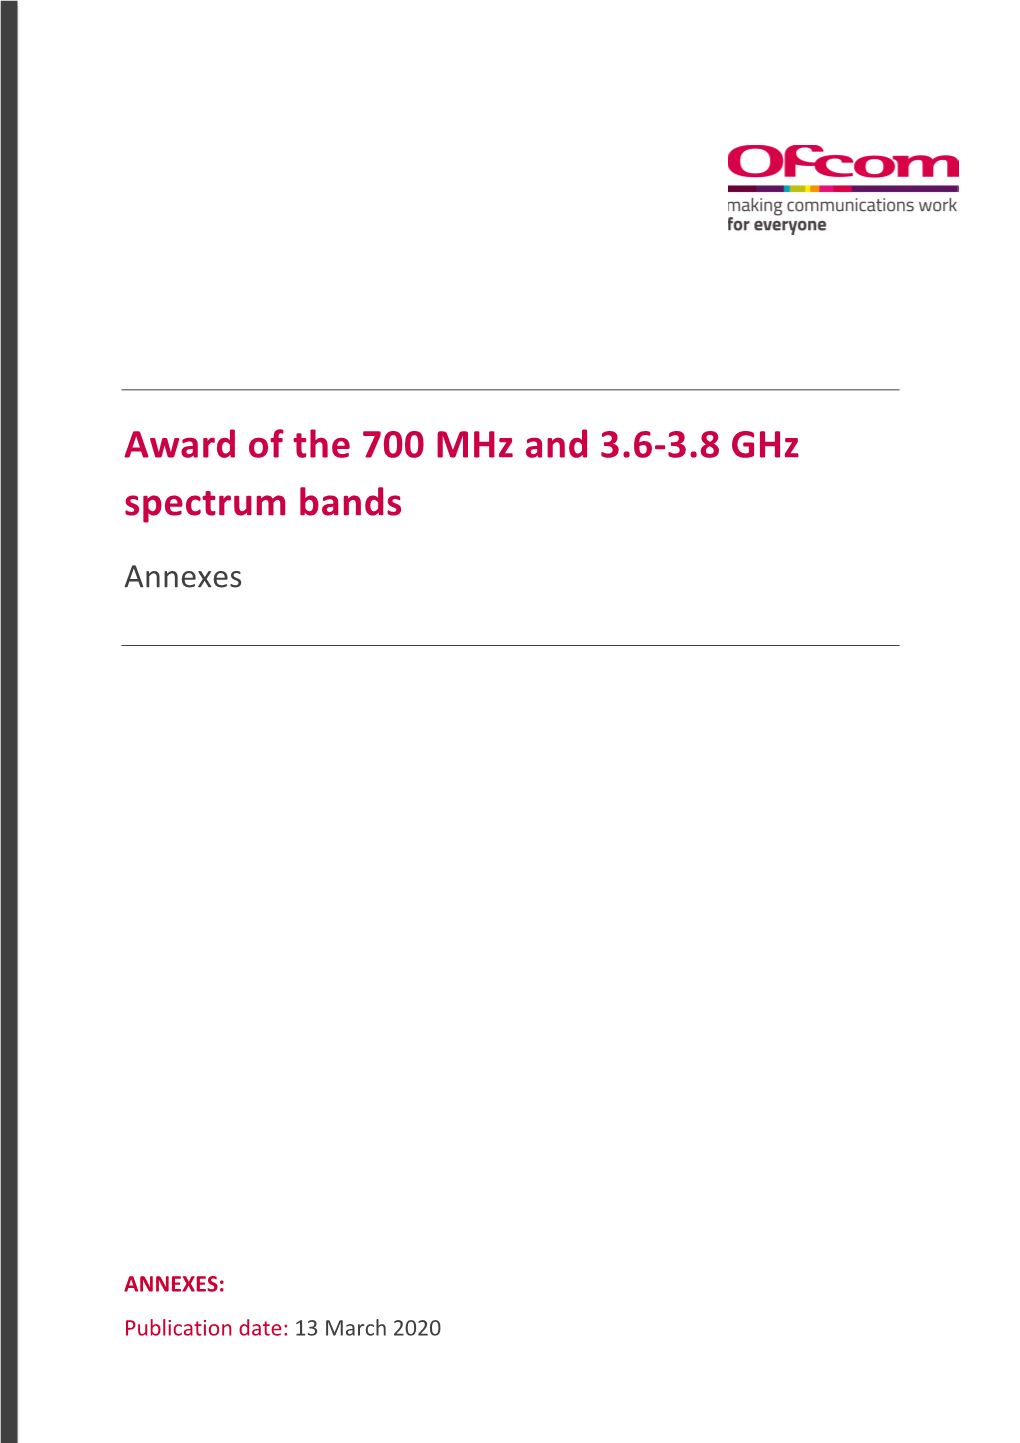 Award of the 700 Mhz and 3.6-3.8 Ghz Spectrum Bands Annexes